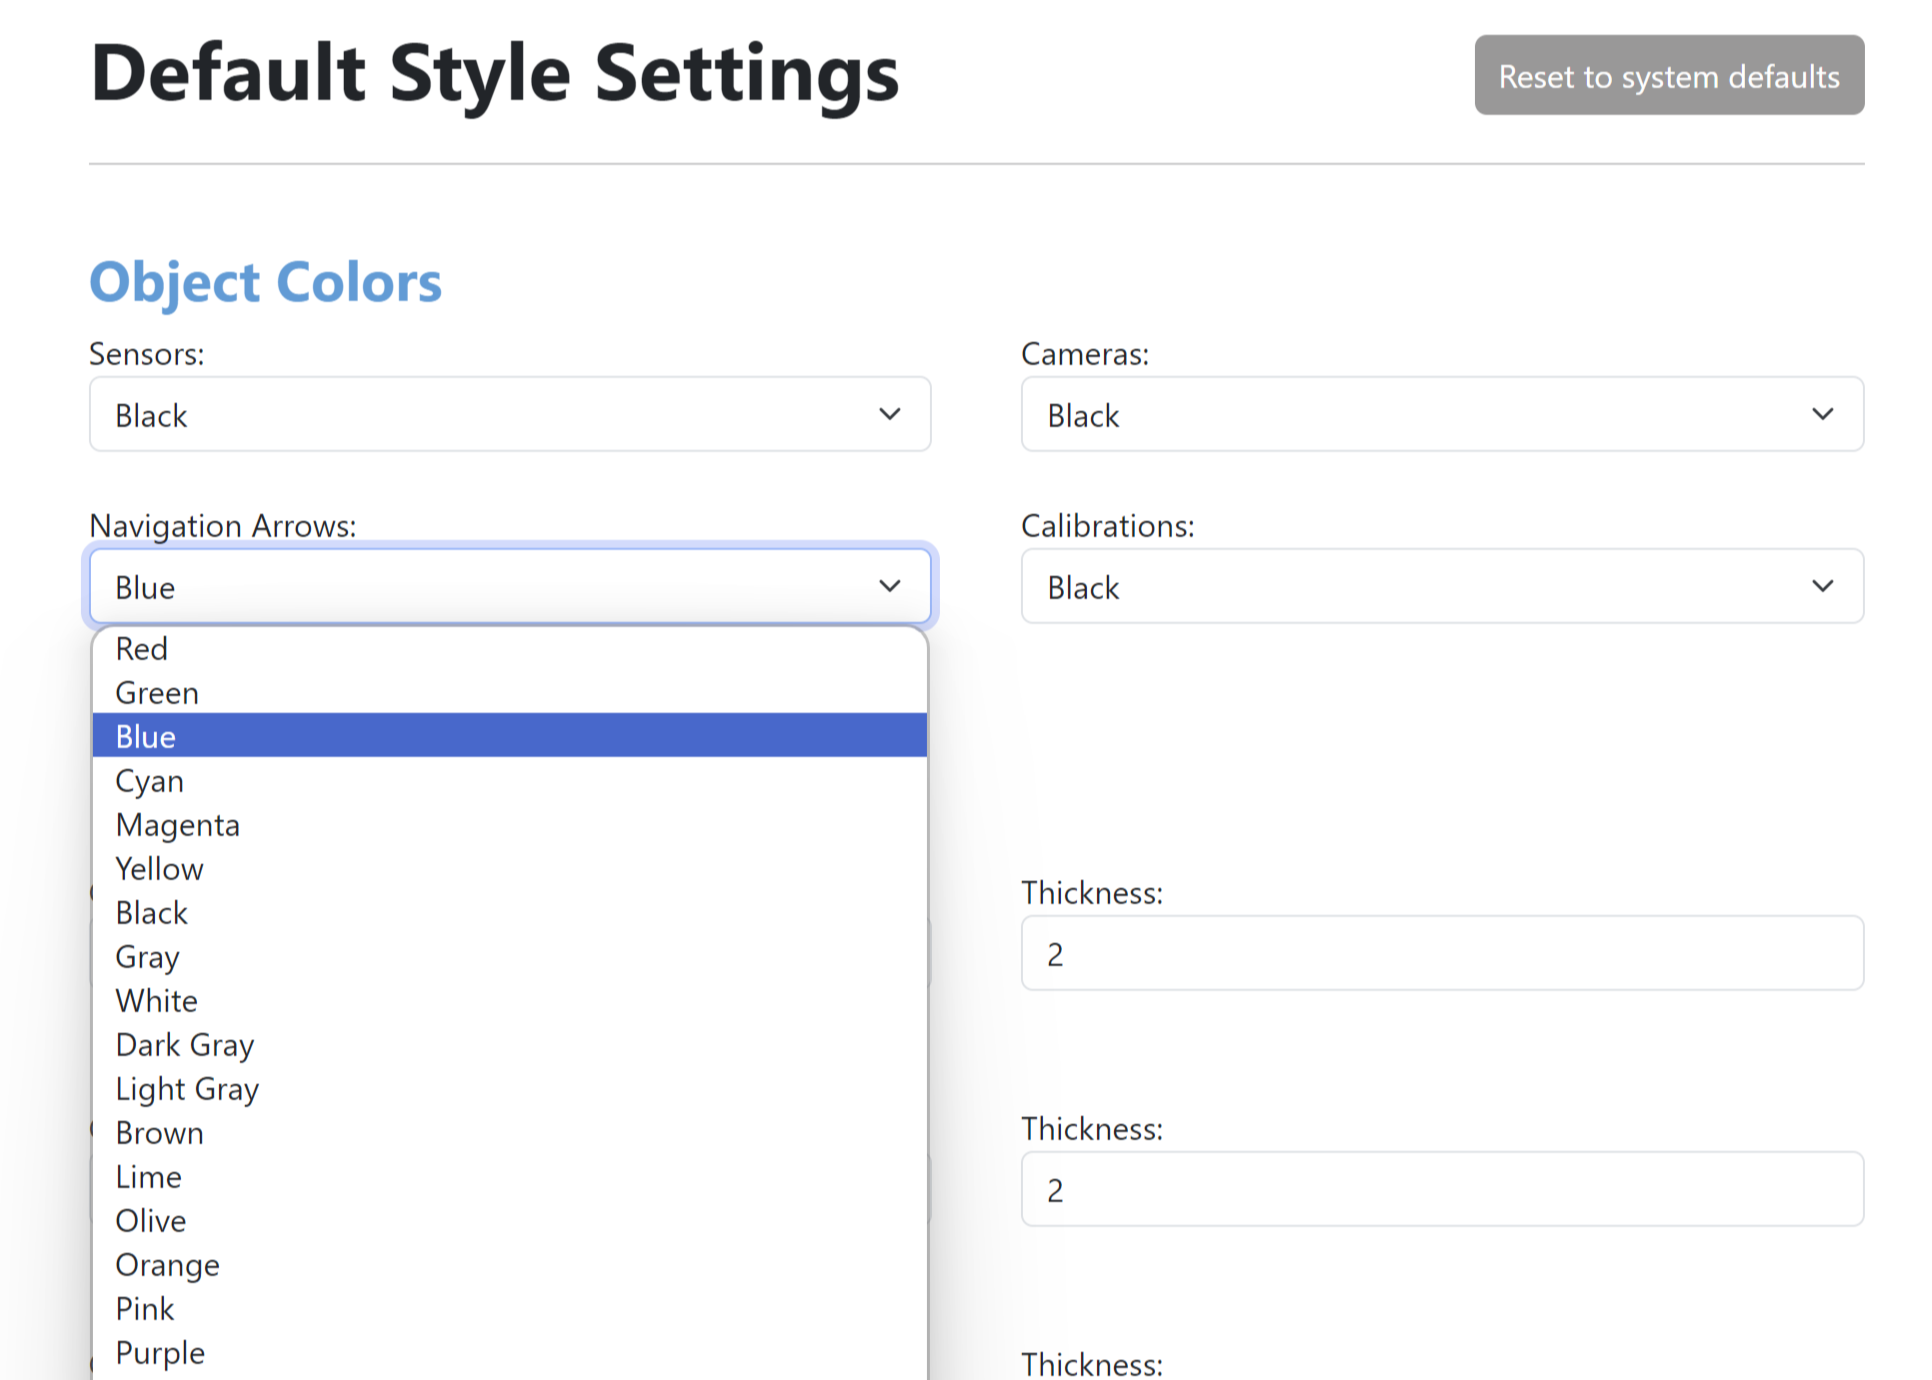 Screenshot of Default Style Settings page